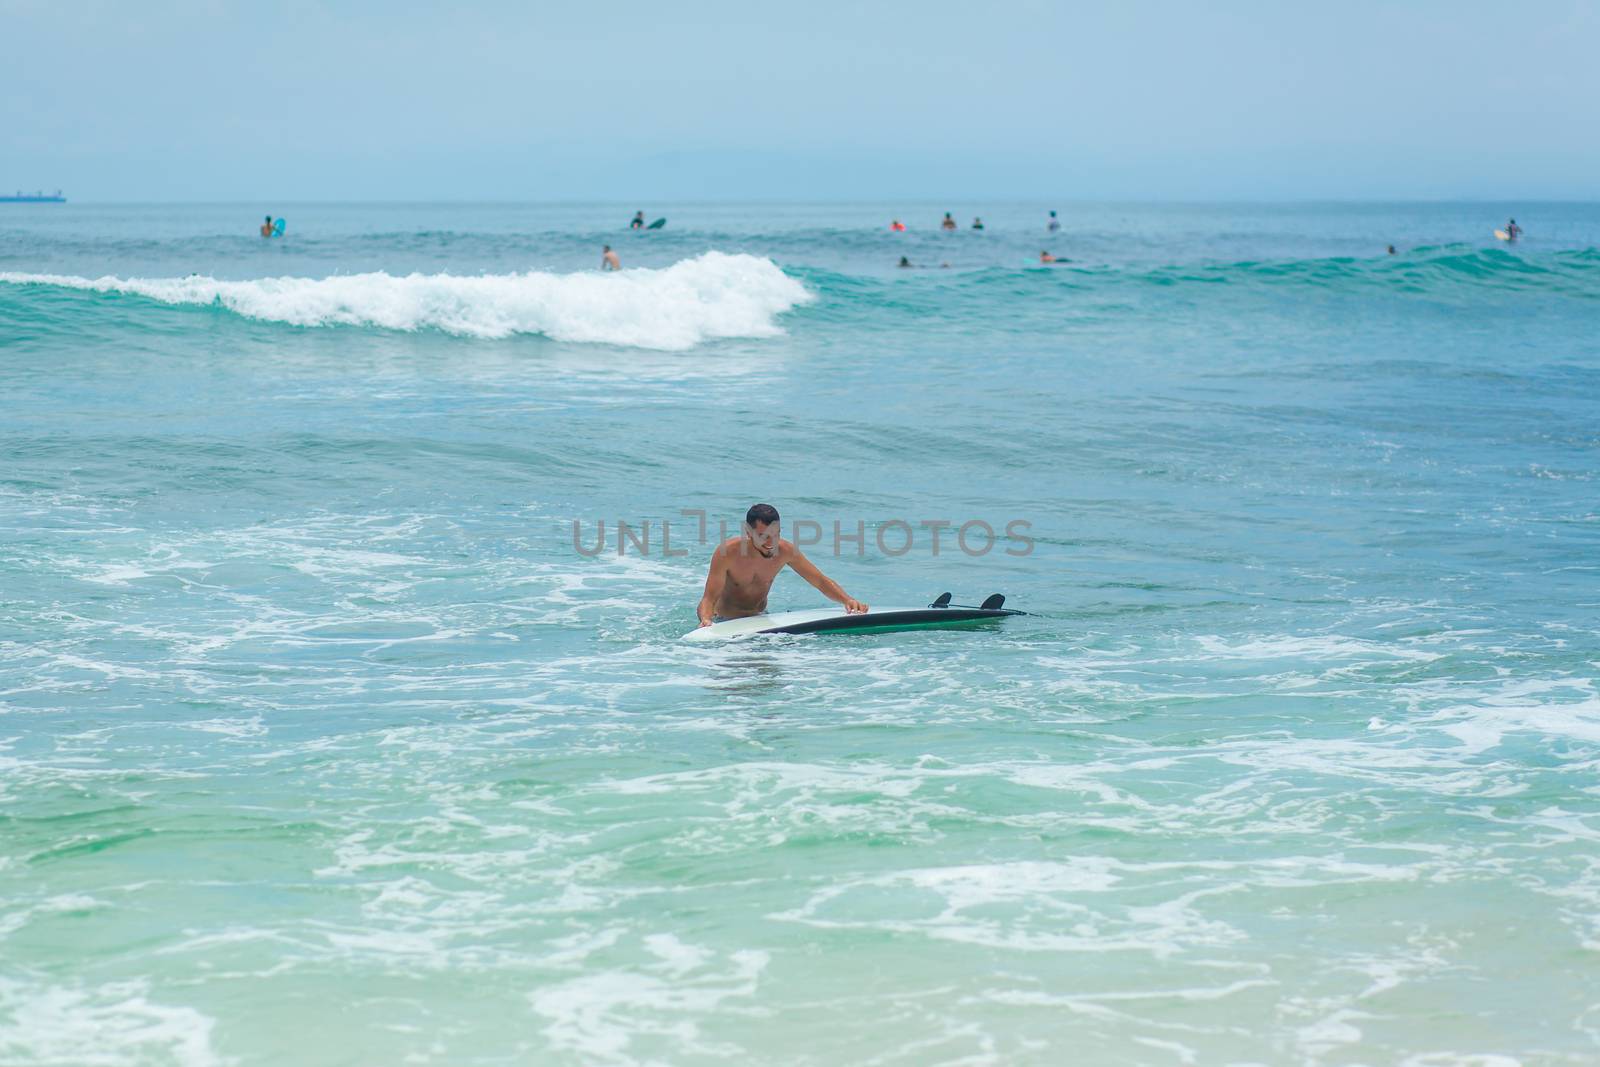 The guy is swimming on the surf board on the ocean. Healthy active lifestyle in summer vocation